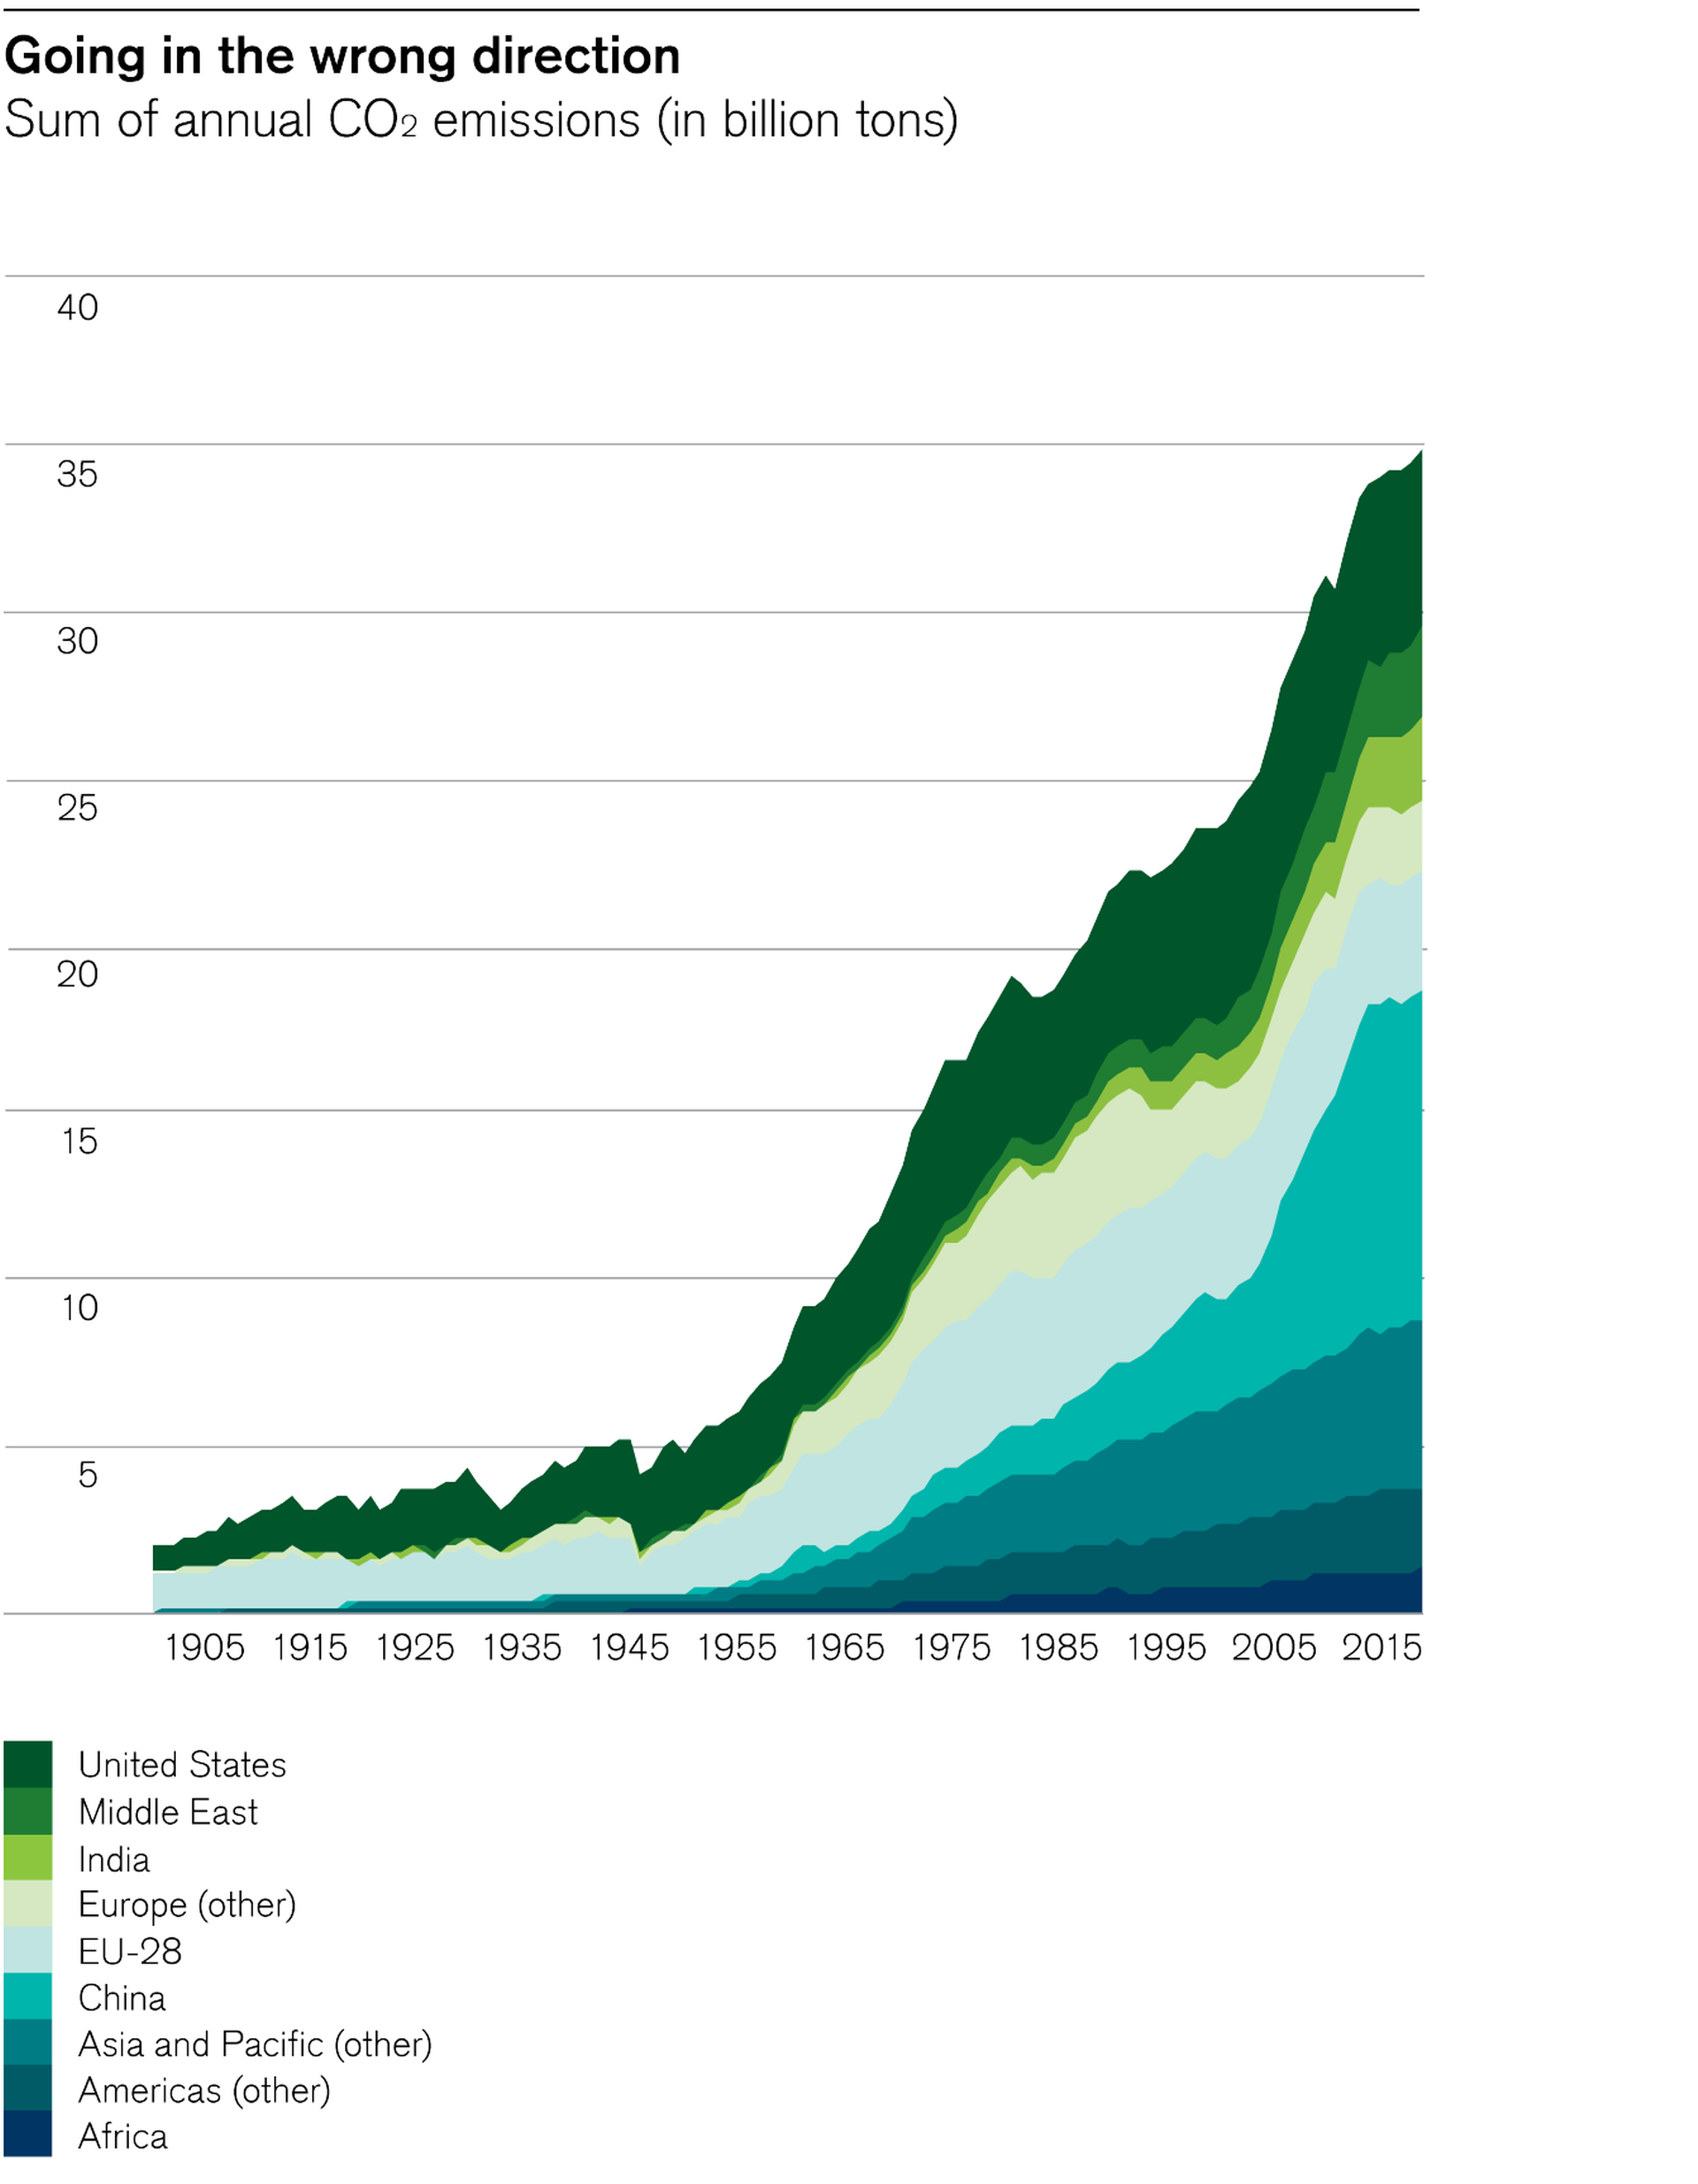 Sum of annual CO2 emissions (in billion tons)